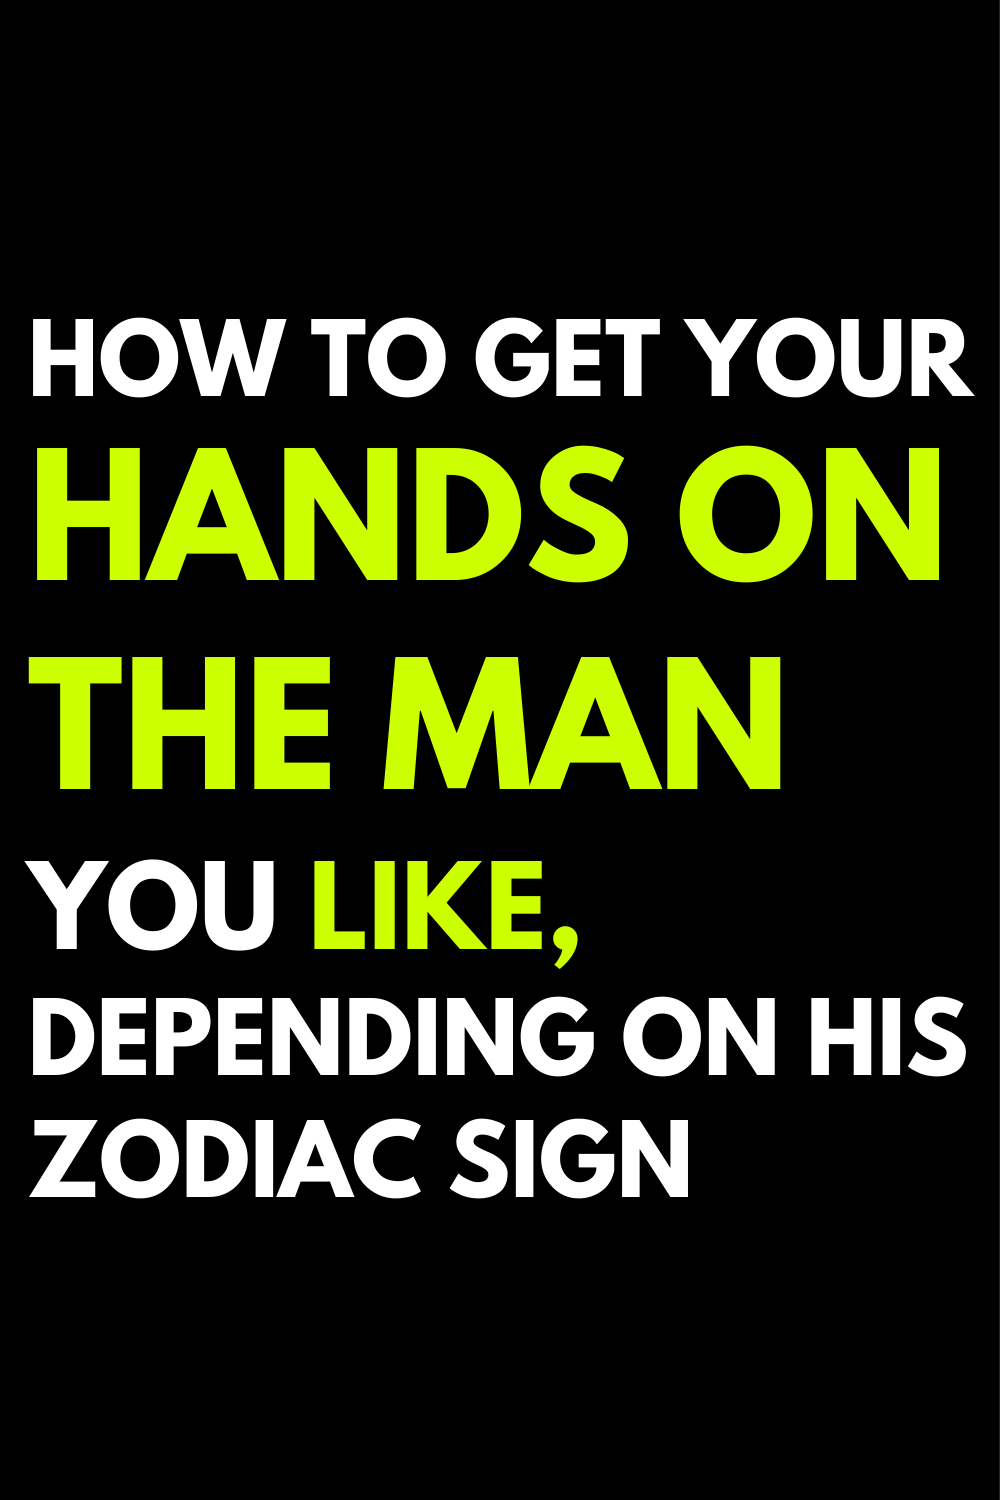 How to get your hands on the man you like, depending on his zodiac sign